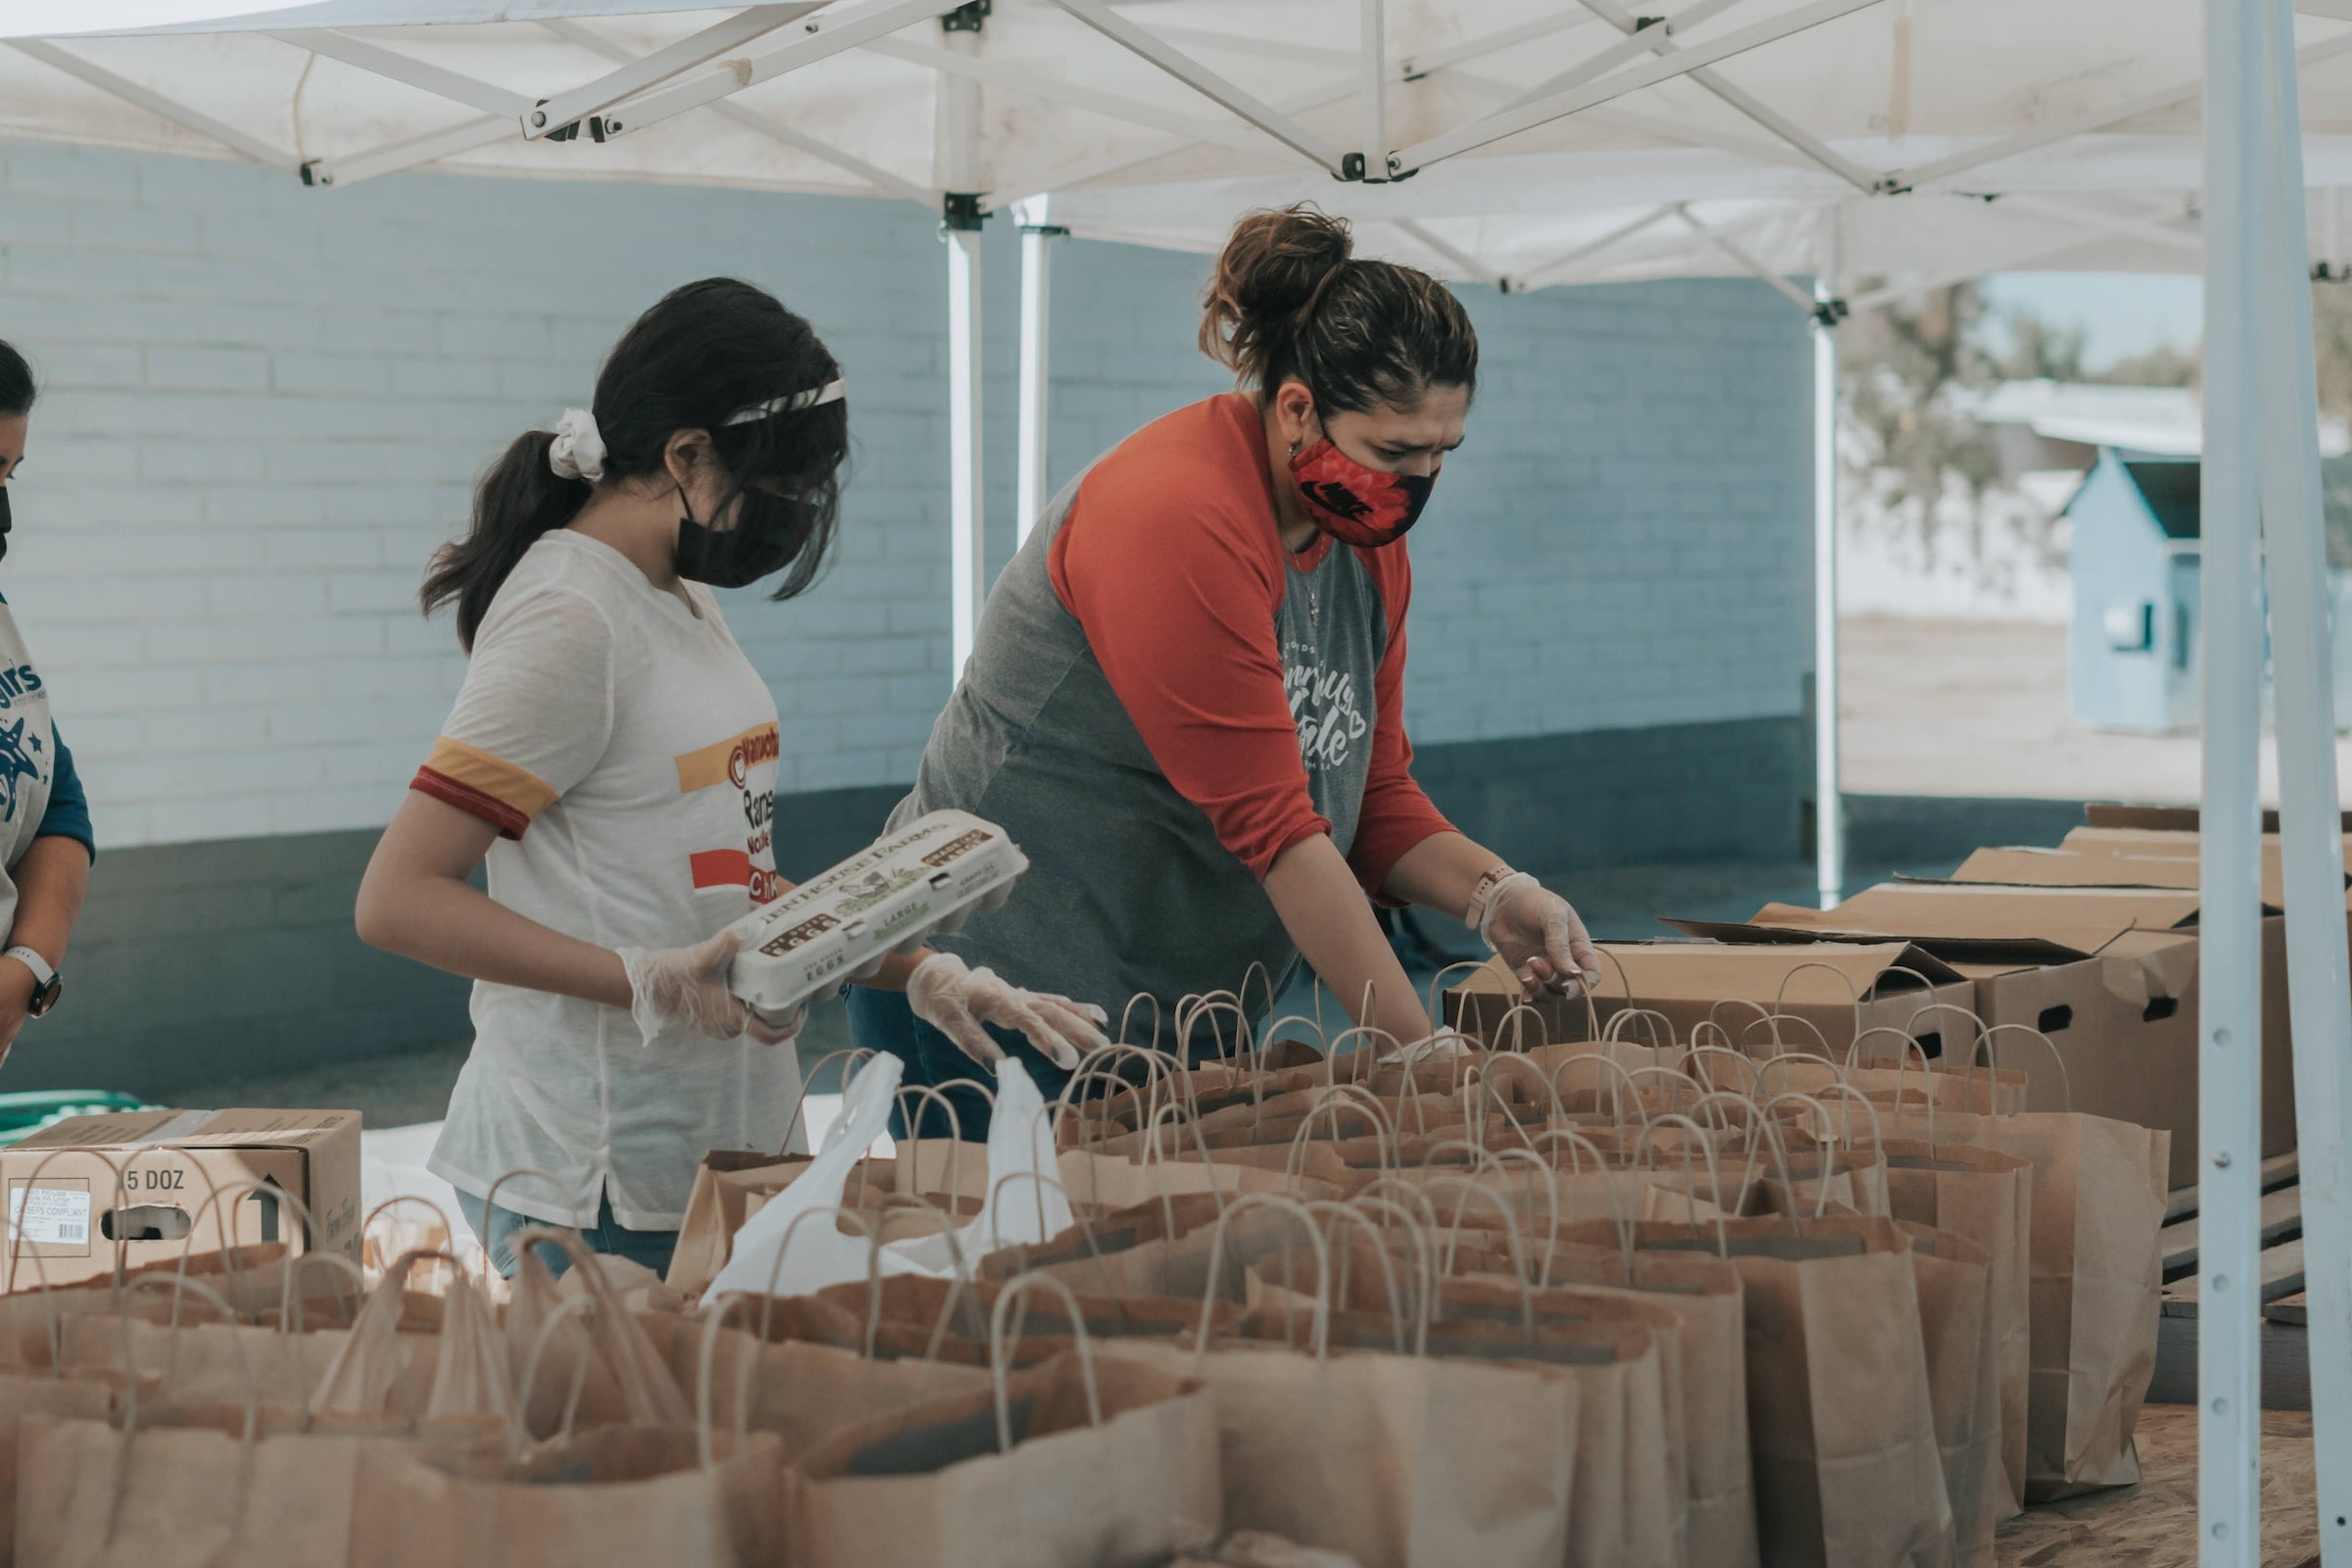 An image of two people volunteering by filling food bags for the homeless.